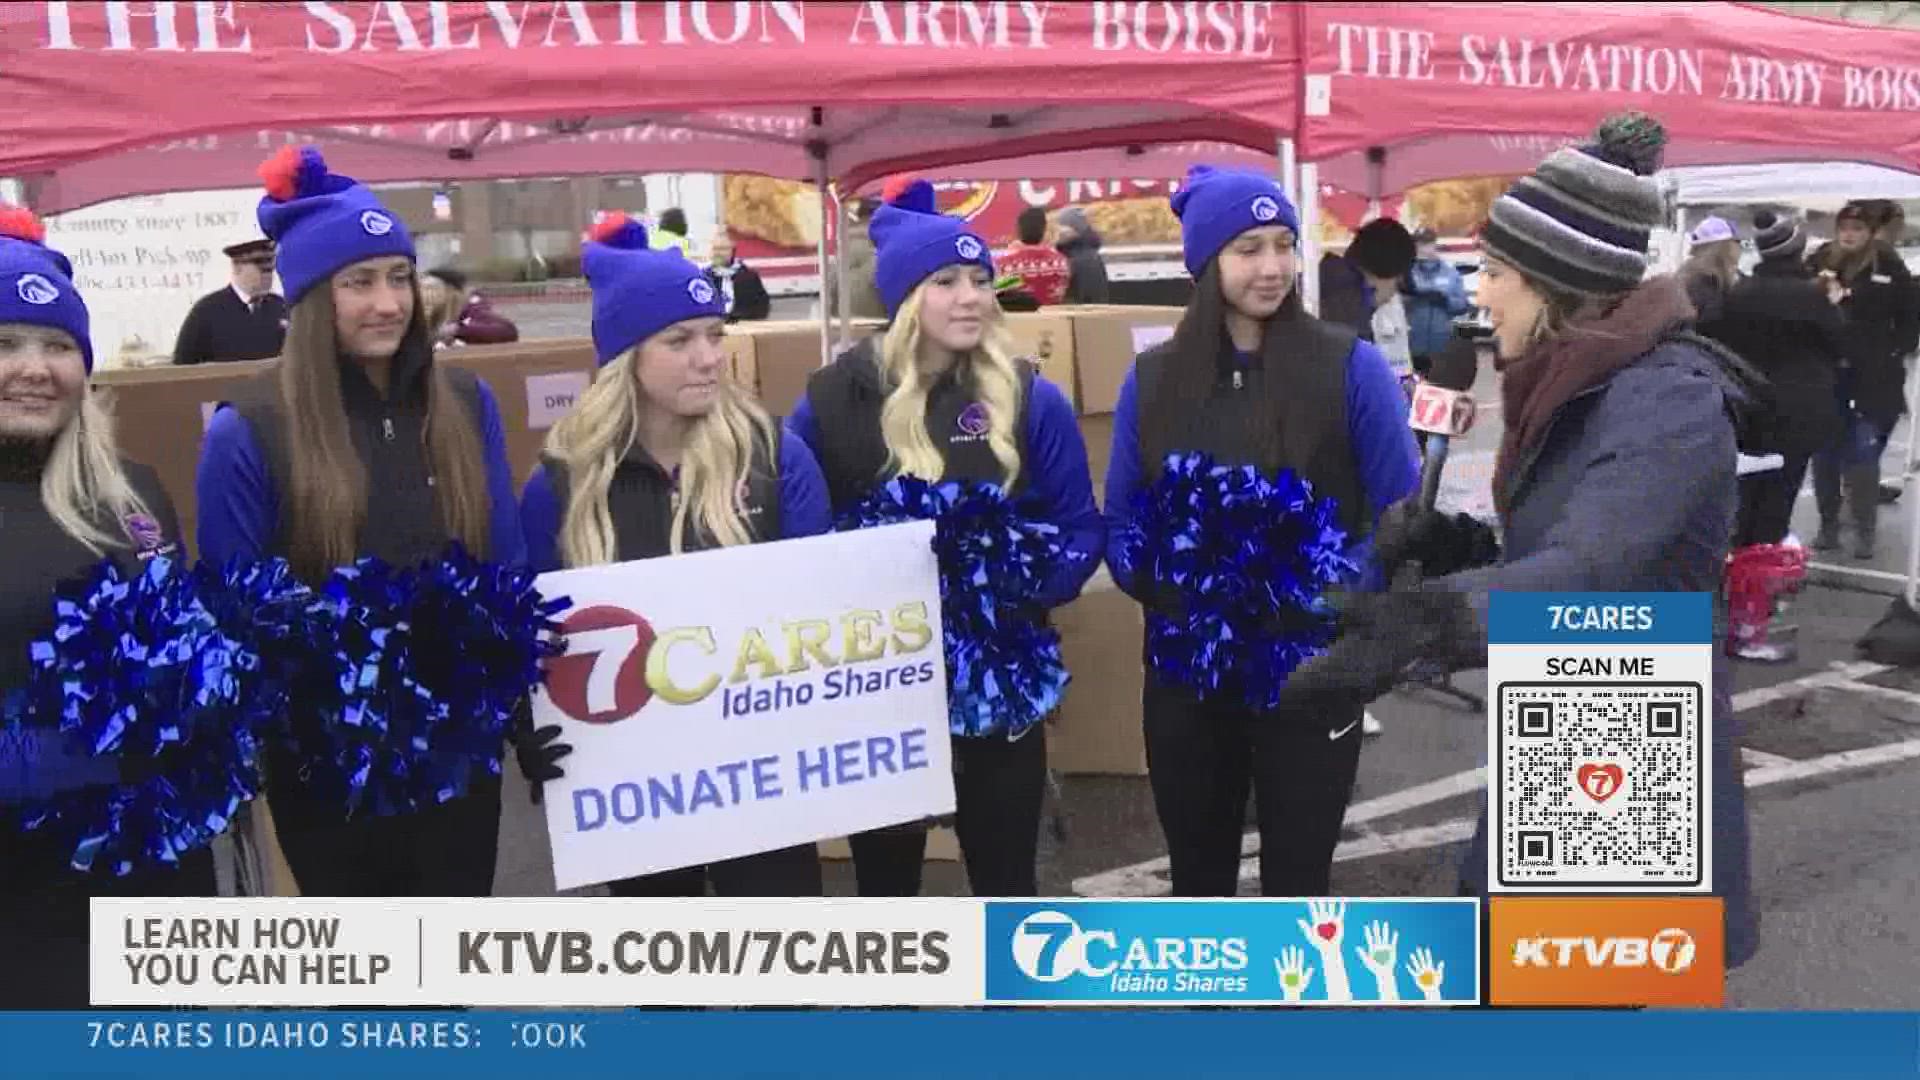 Boise State Cheer Squad volunteers, helping collect donations for 7Cares Idaho Shares.